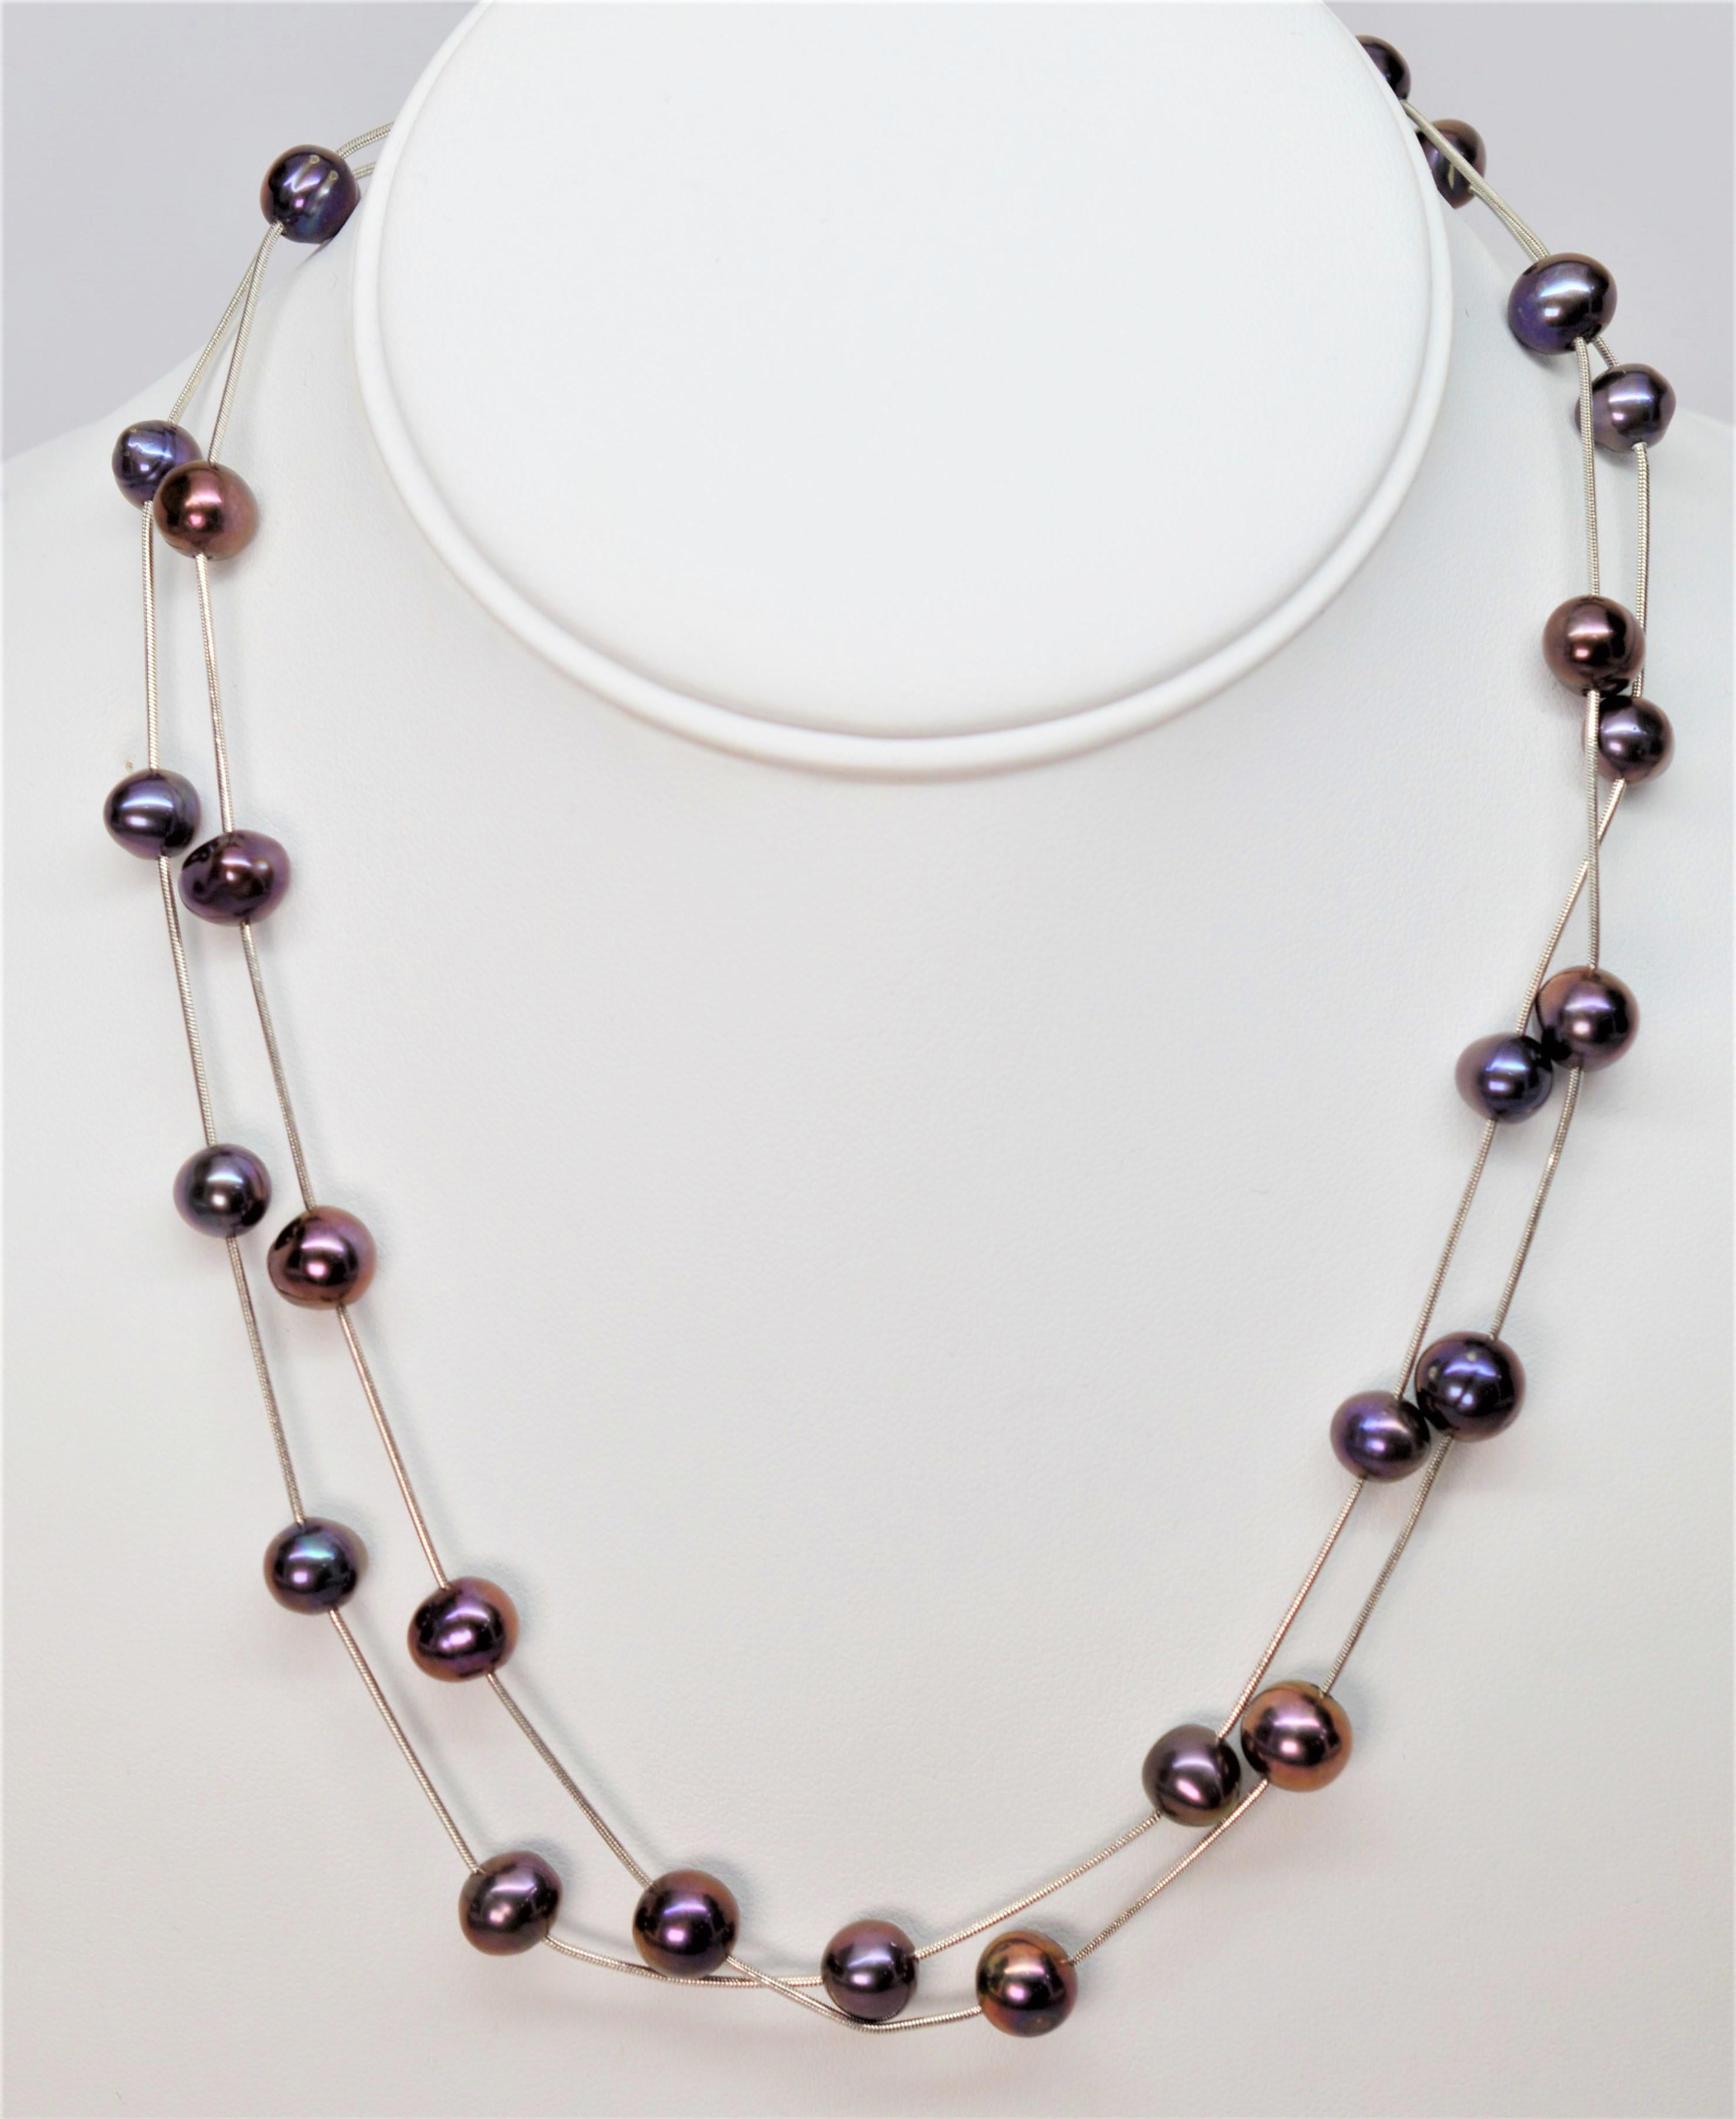 Floating on fourteen karat 14k white gold snake chain are vibrant iridescent natural shaped Akoya Pearls. Included are one set of two (2) seventeen inch strands of 
off-round to button shaped pearls ranging in size 7.5 - 9mm with a colorful